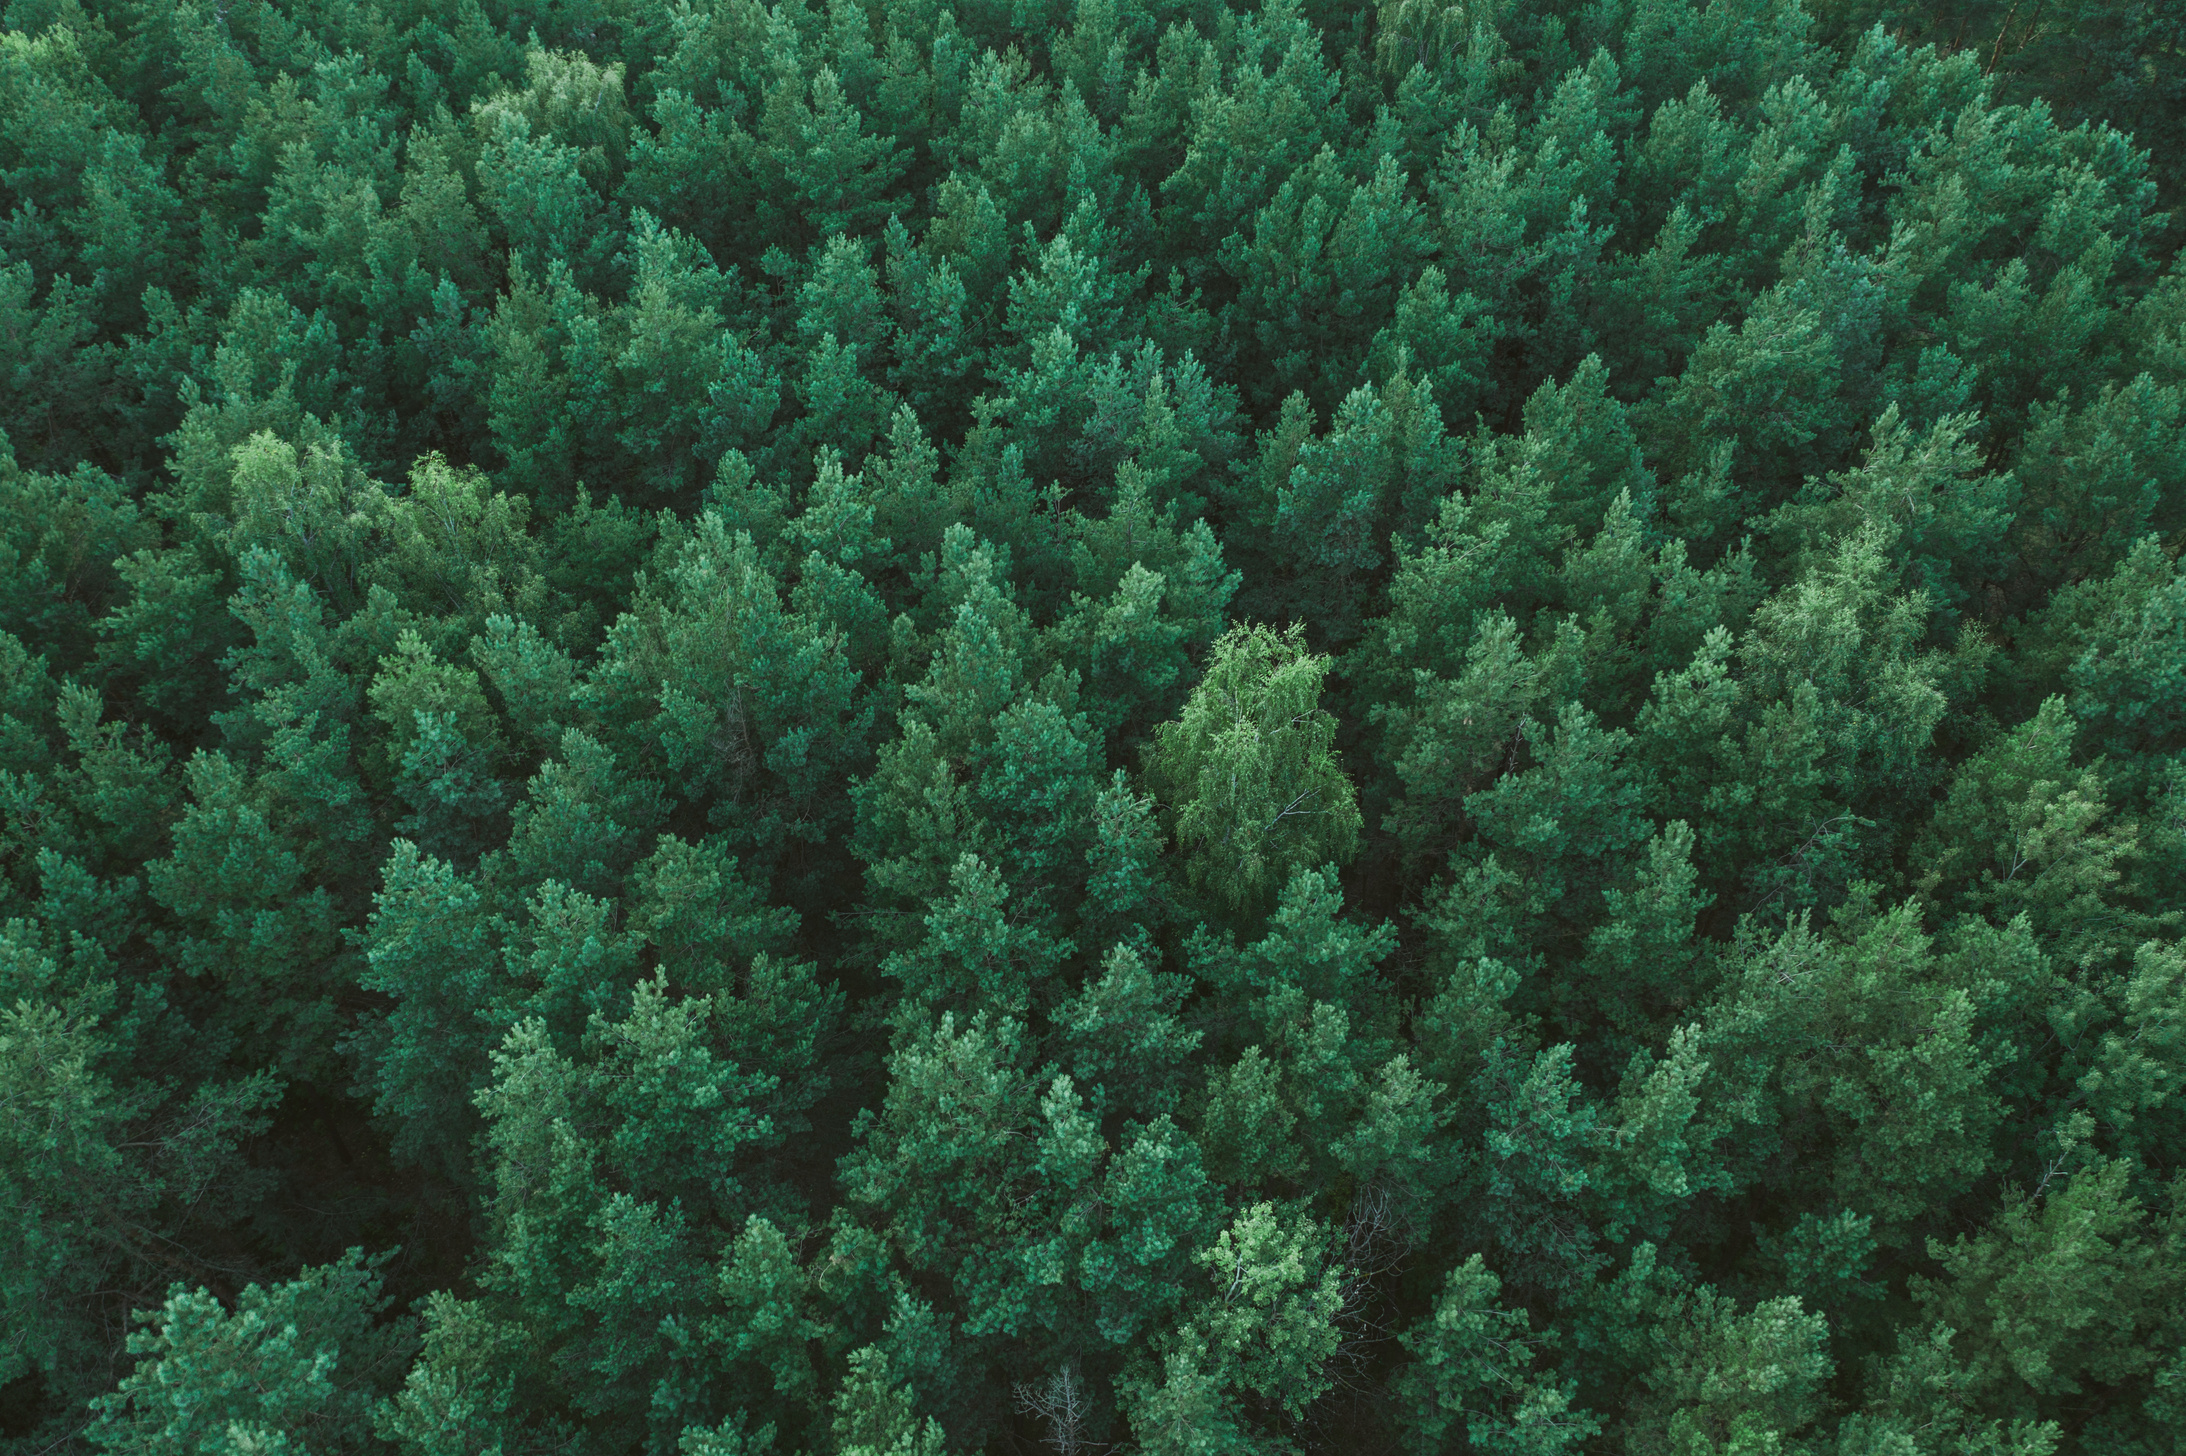 Green pine forest from above